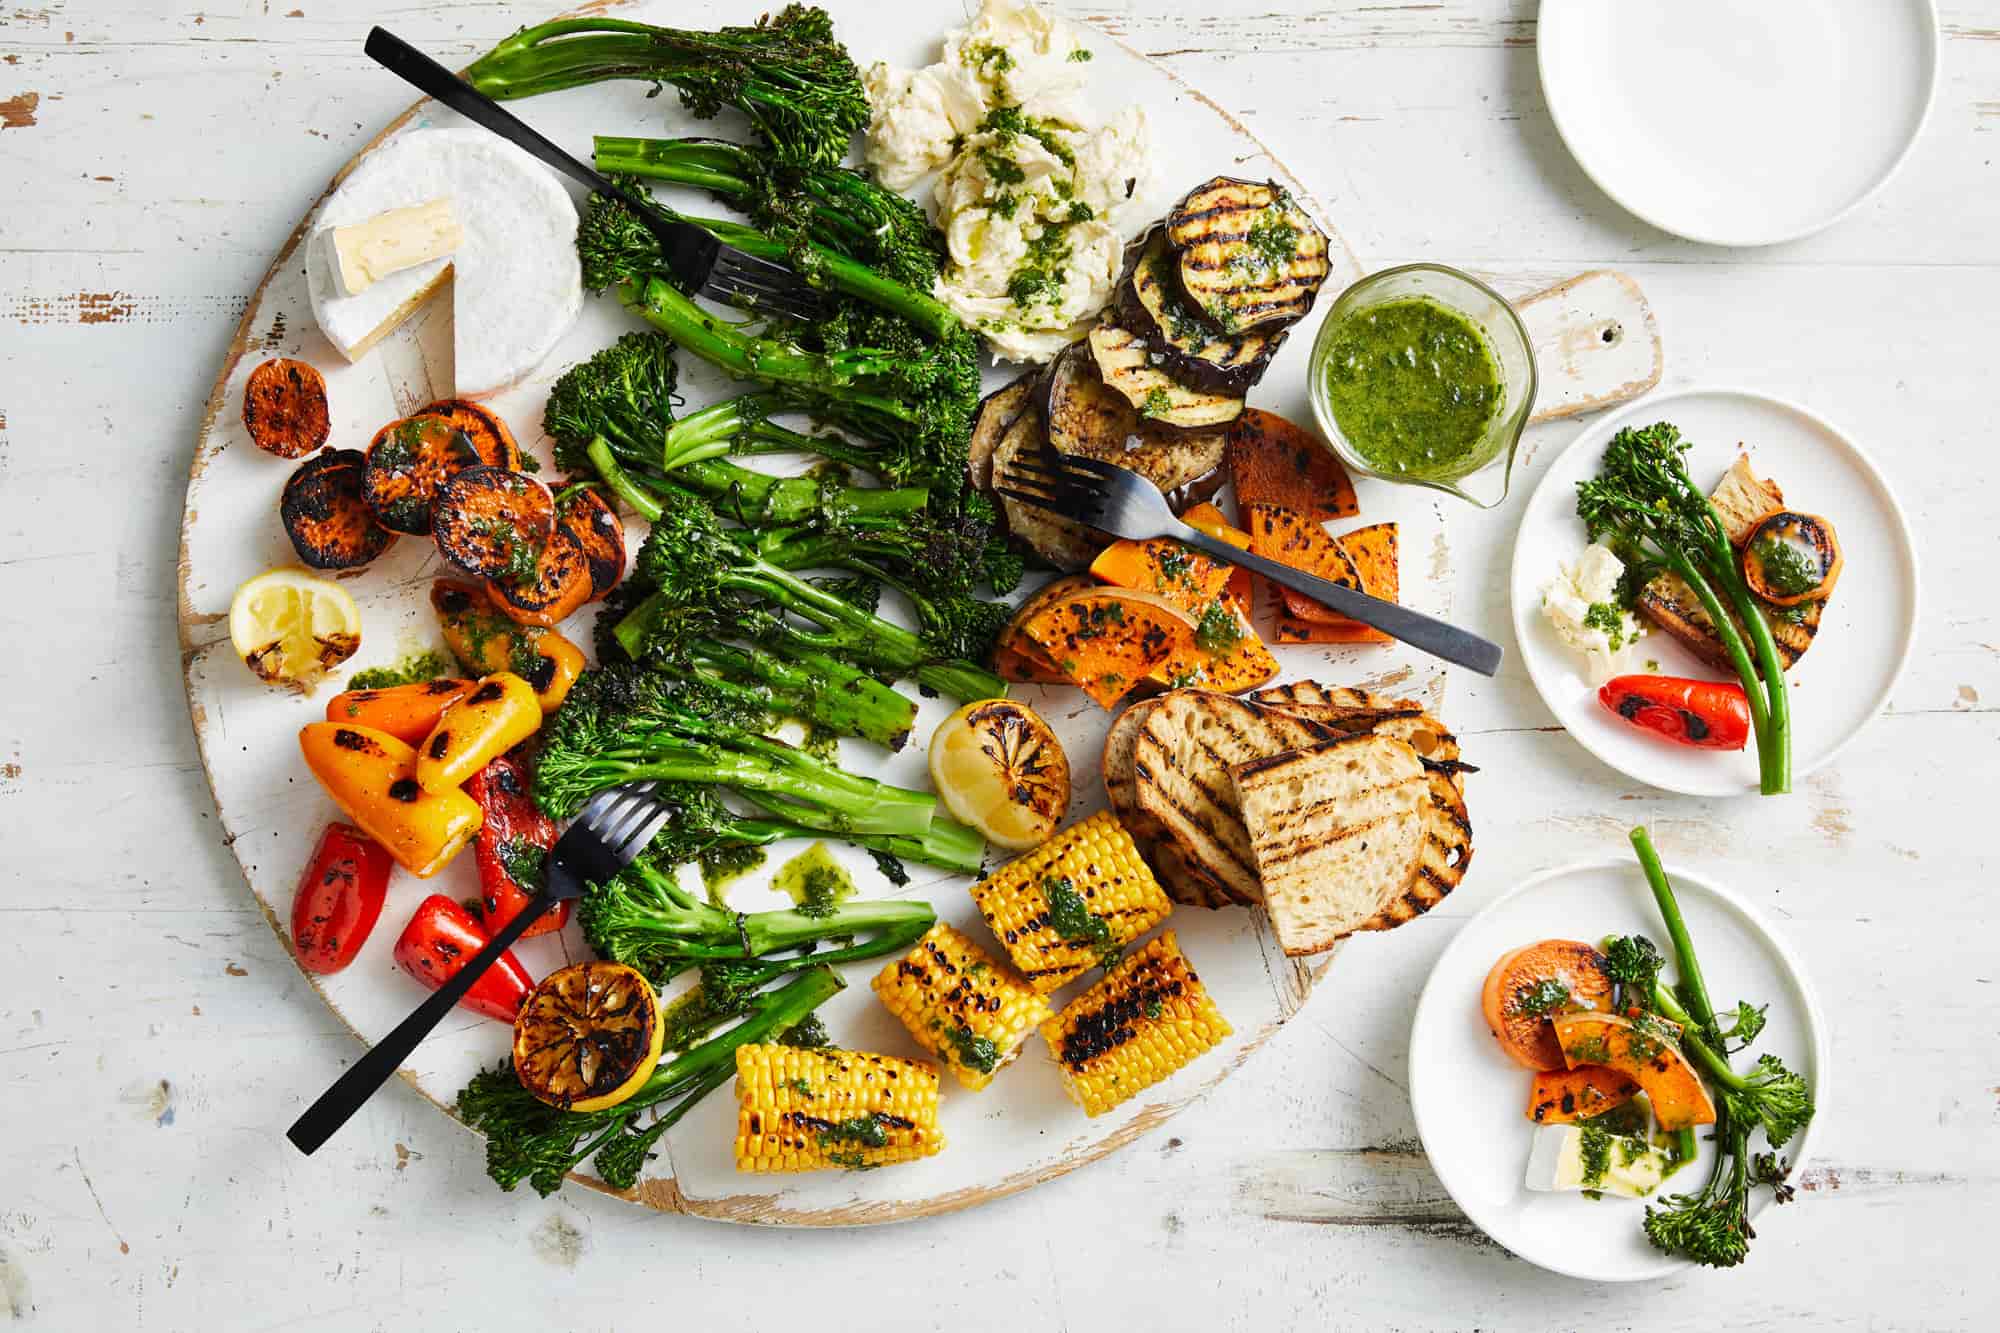 Broccolini_Minicaps_Chargrilled Vegetable Board